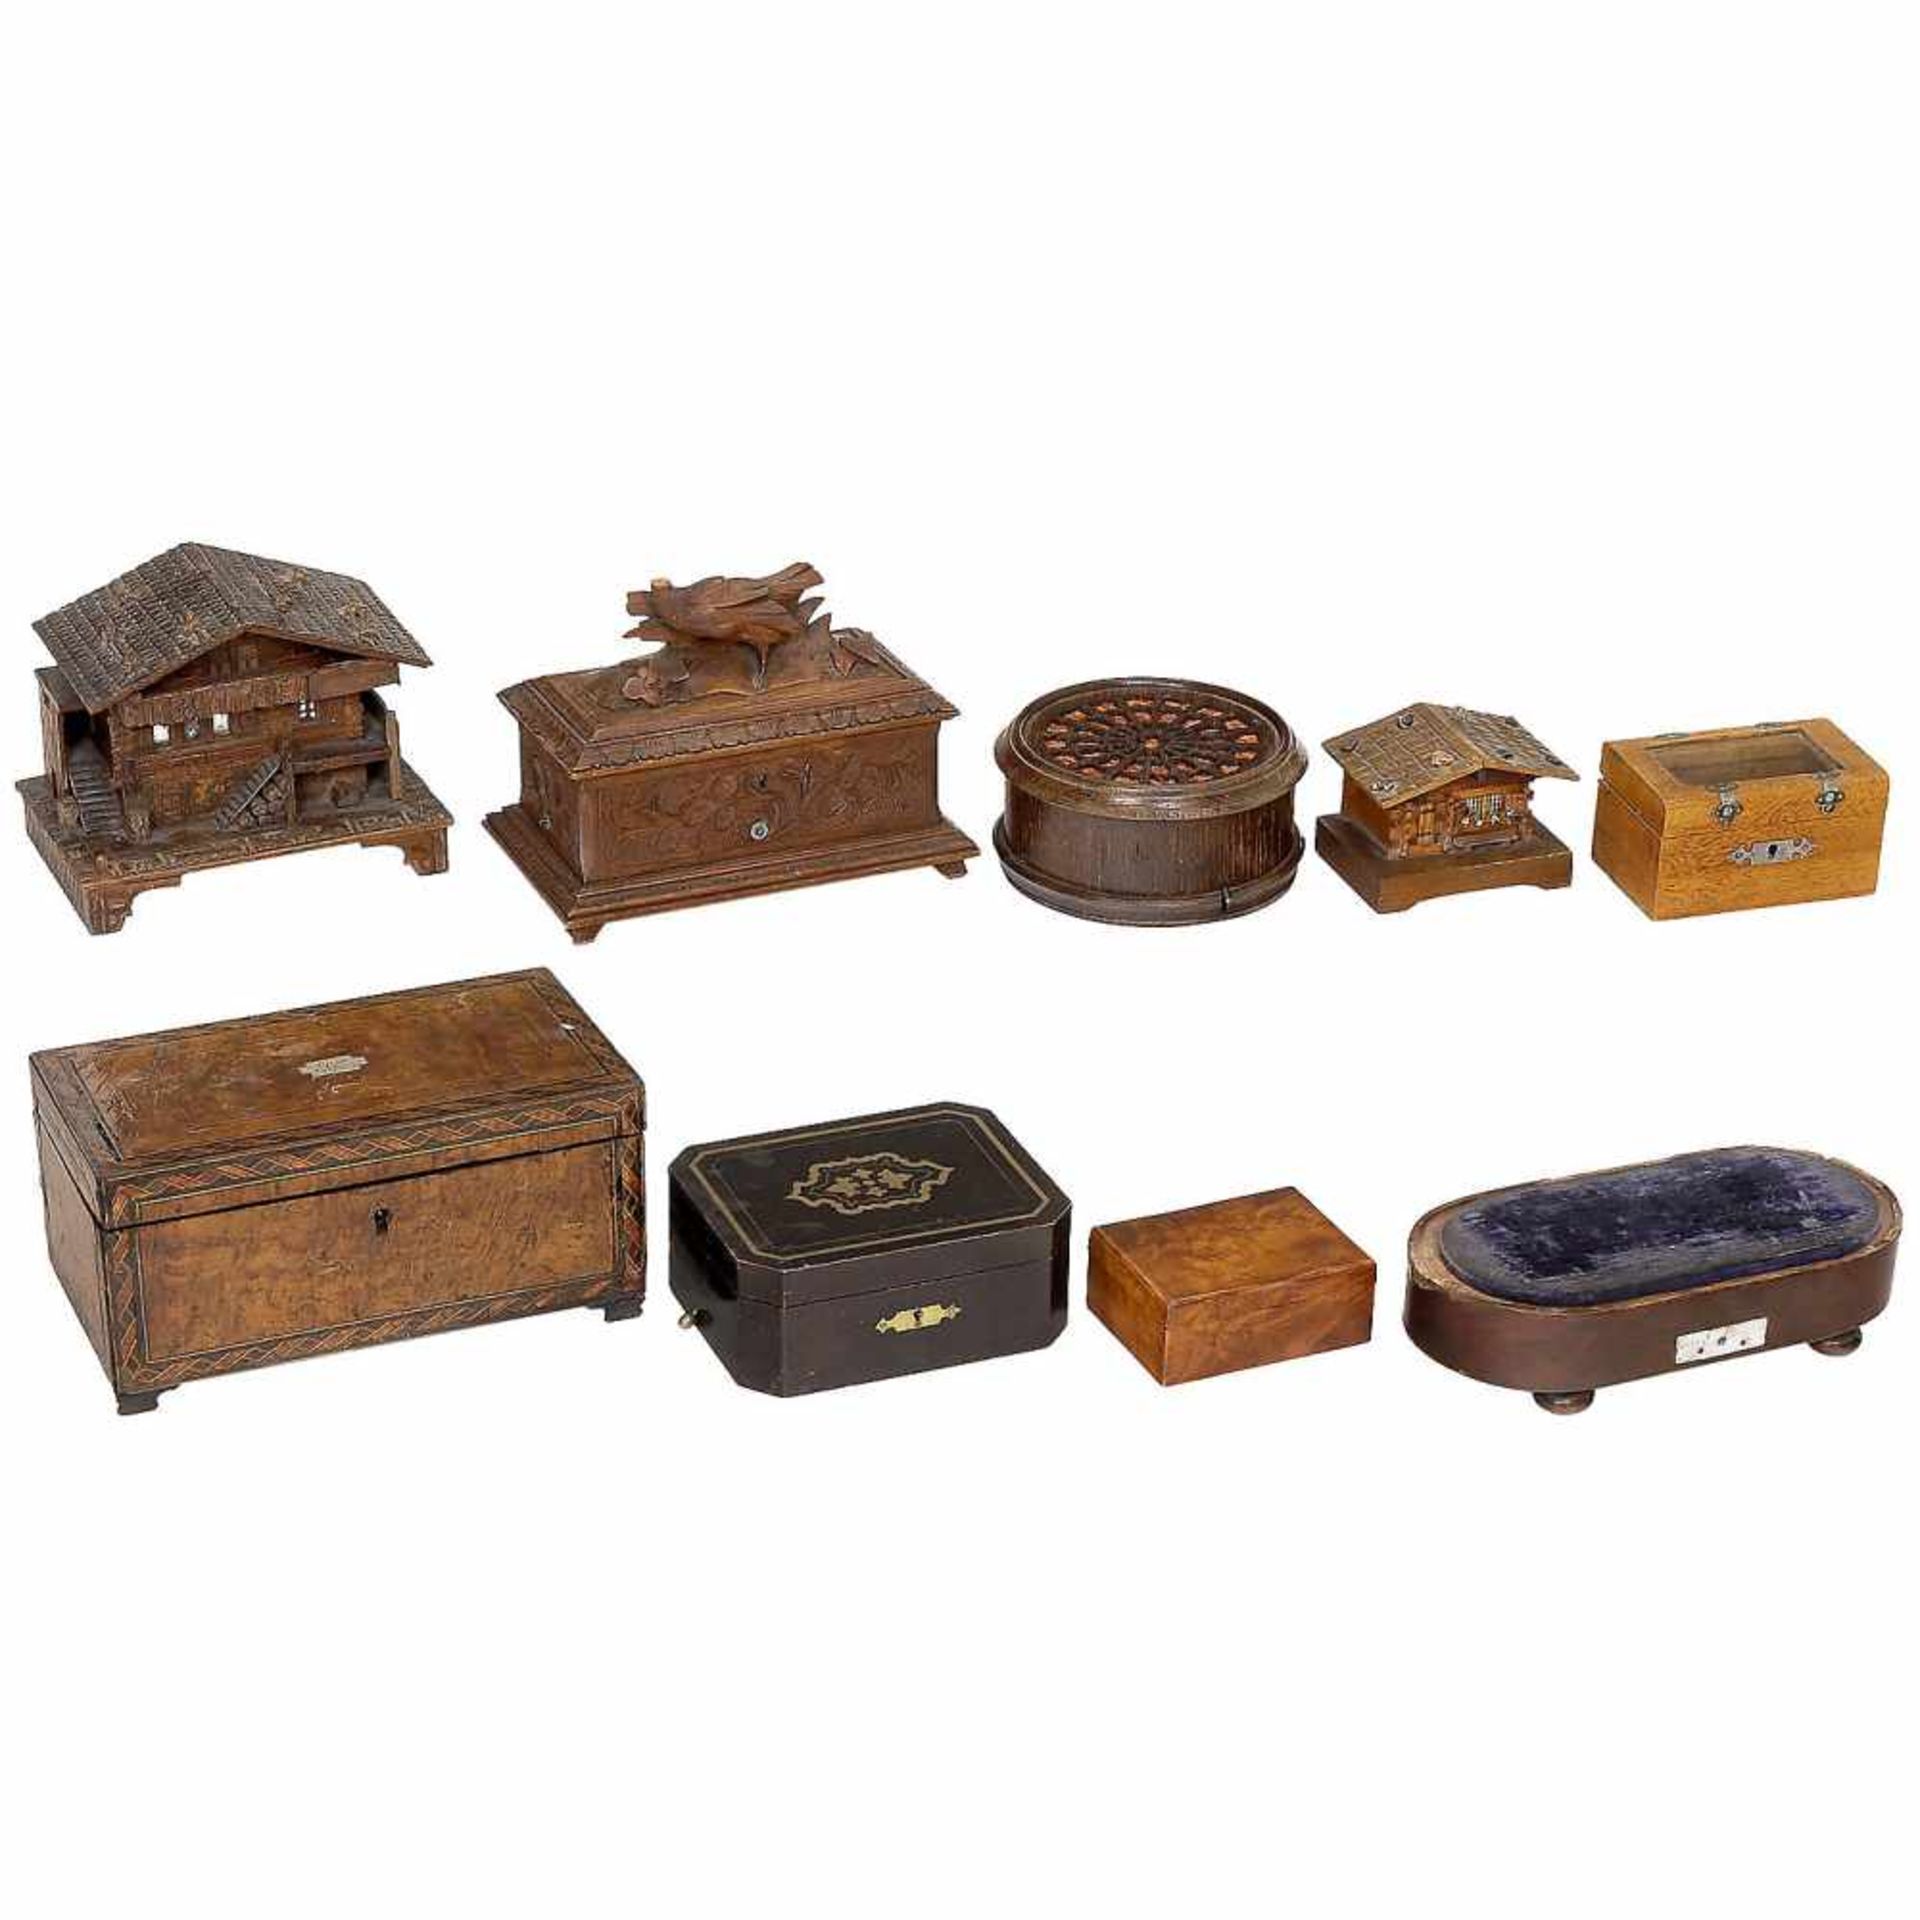 9 Musical Box Movements and Cases for Spares/ RestorationTabatière in an earlier inlaid case;